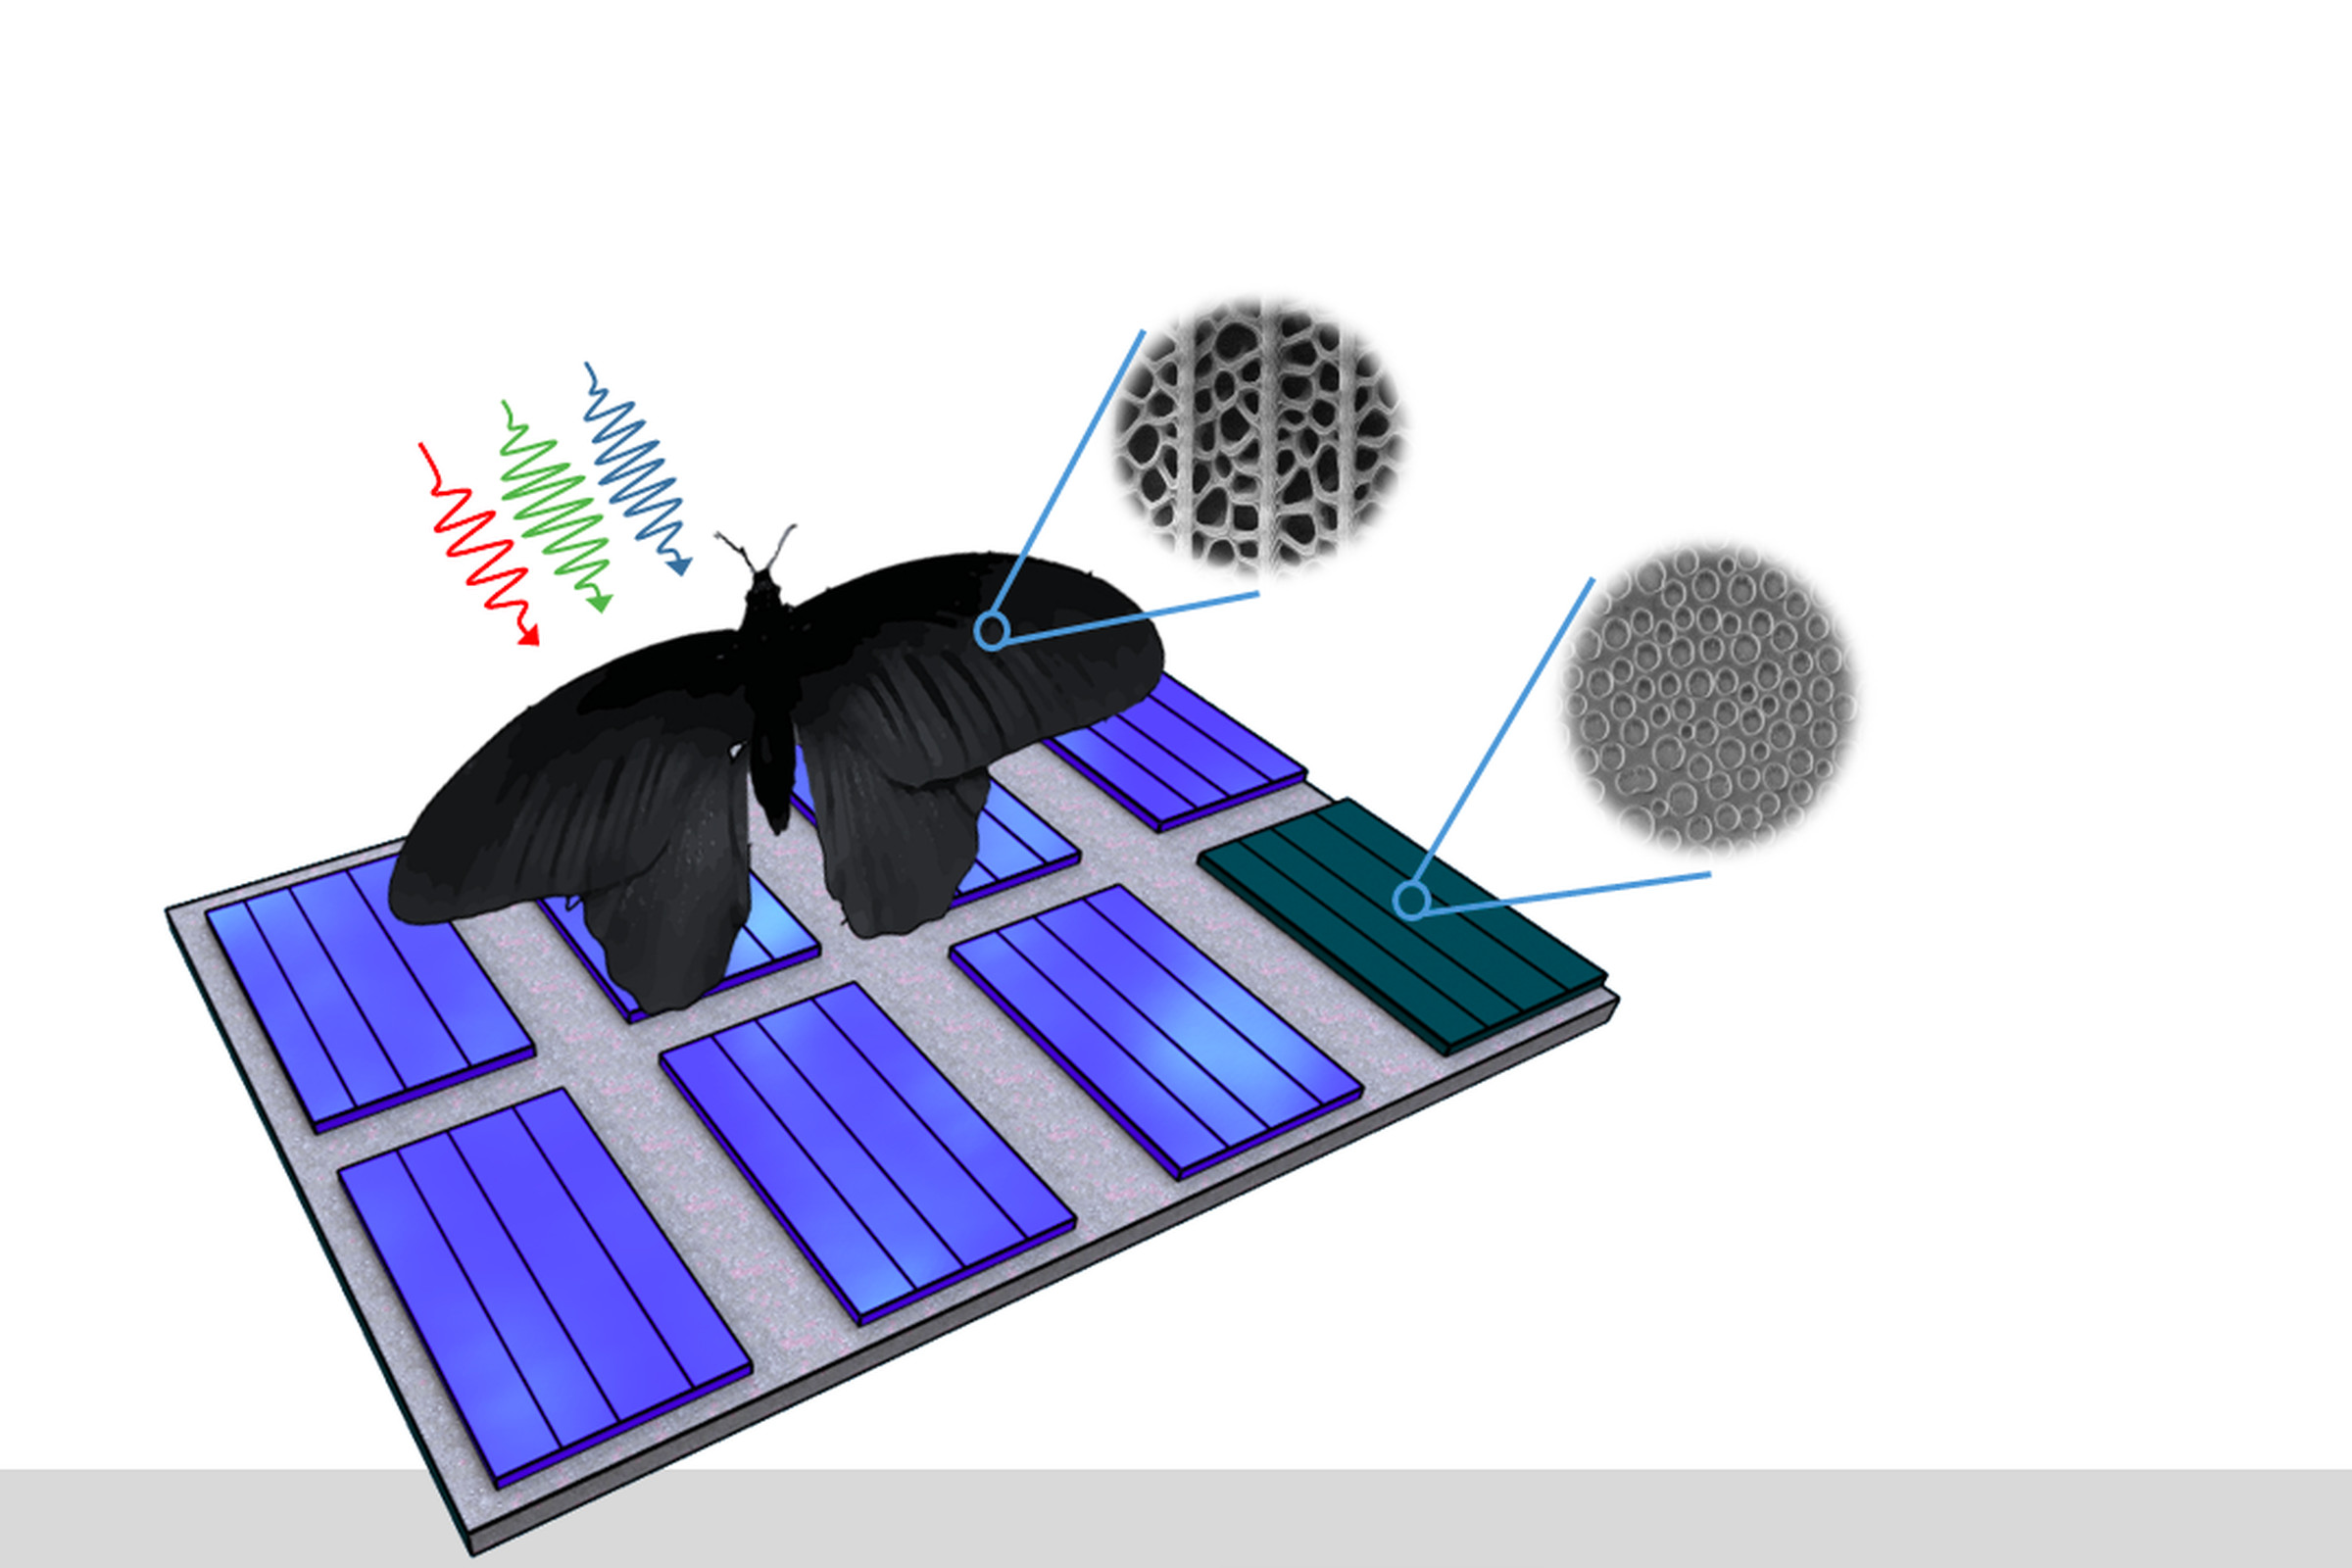 Scientists from KIT and Caltech utilize the disordered nanoholes of the black butterfly to improve solar cell performance.